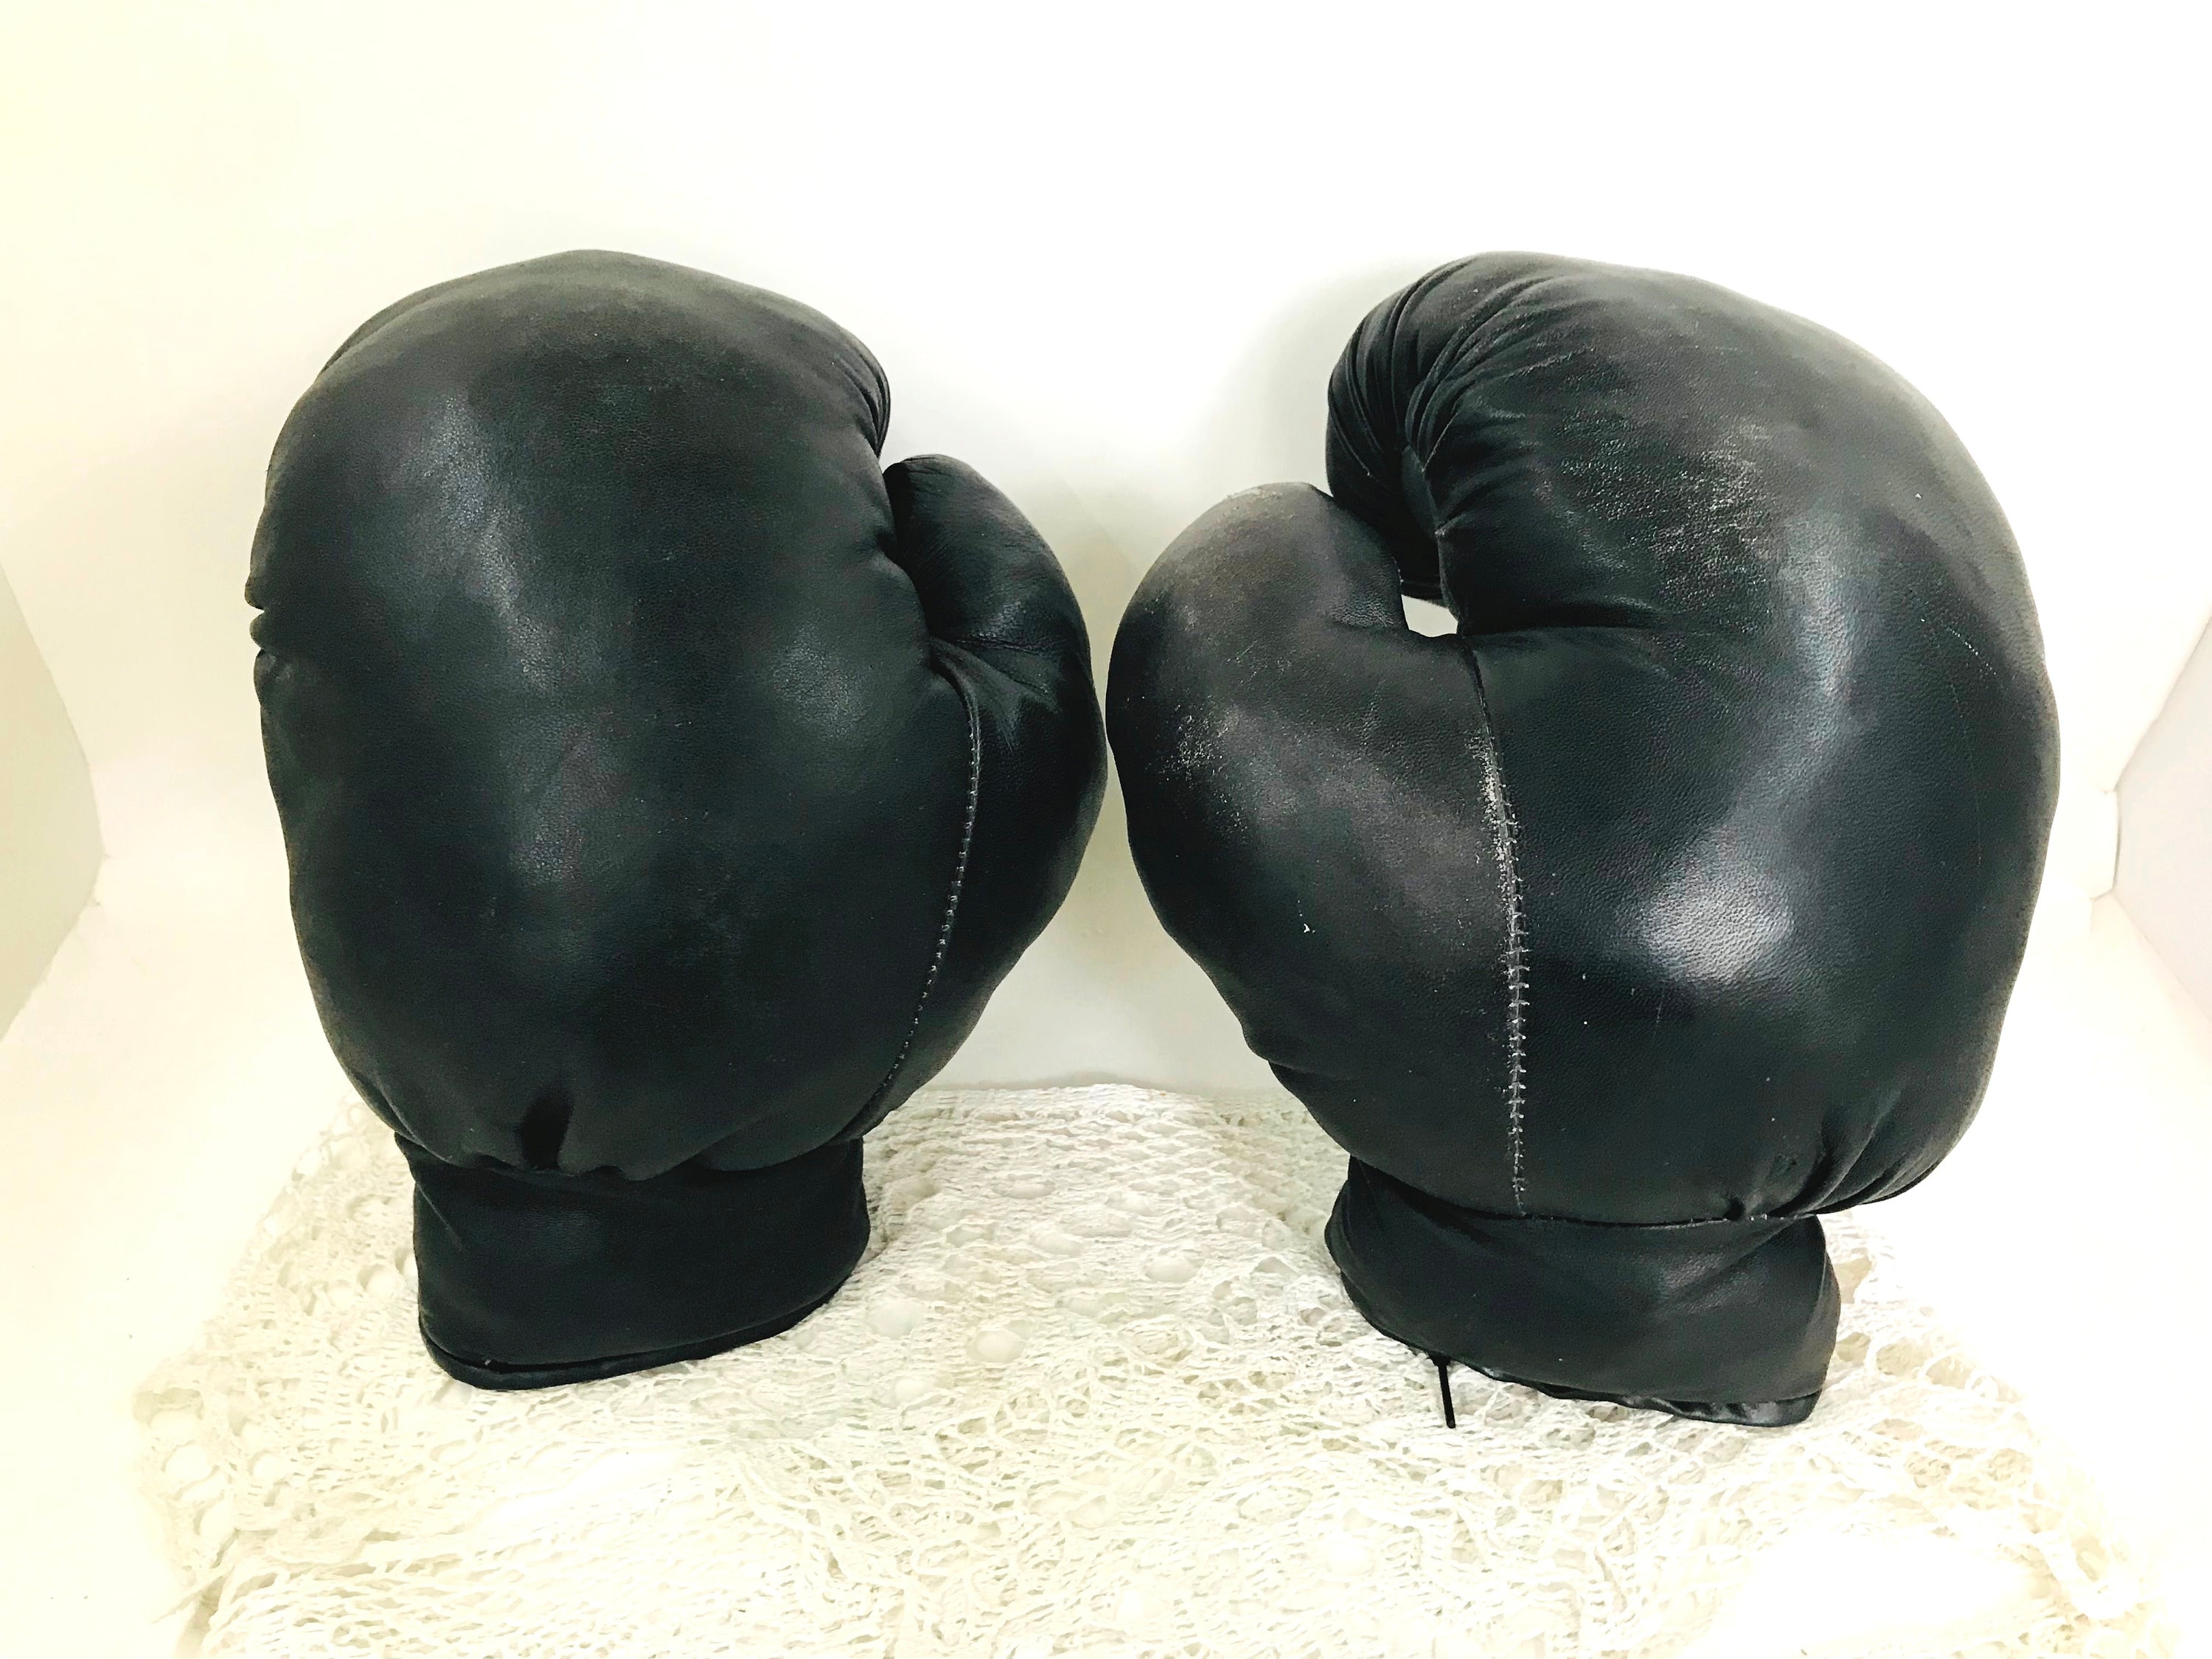 Versace Lamyland Leather Boxing Gloves In Black Gold